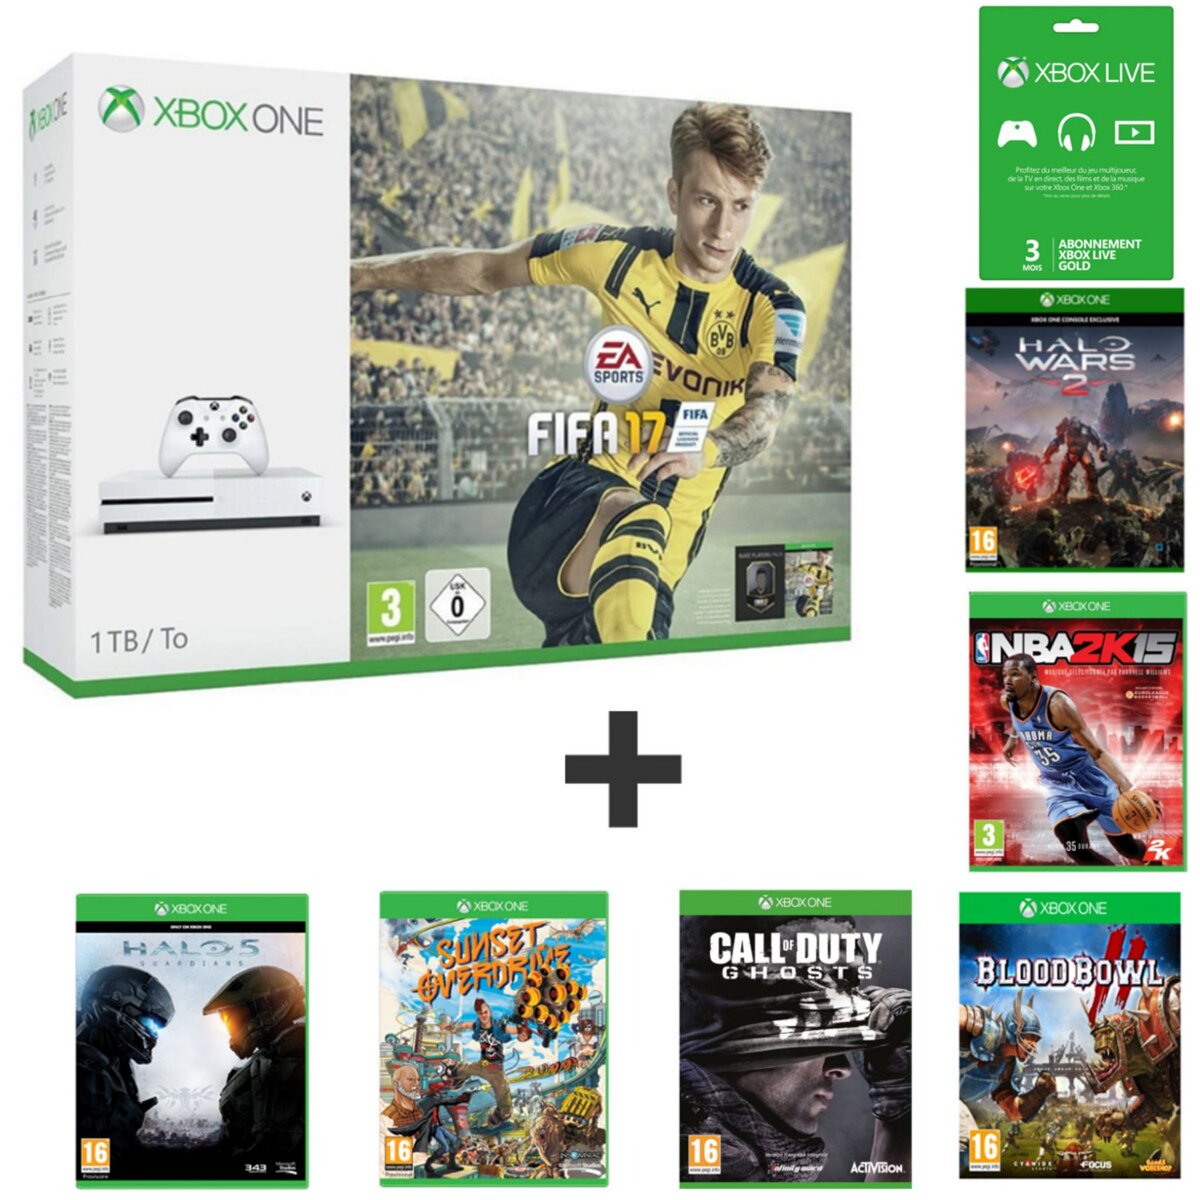 EXCLU WEB Console Xbox One S 1To FIFA 17 + 3 mois Xbox live + Halo Wars 2 + Halo 5 + Sunset Overdrive + Blood Bowl 2 + NBA 2K15 + Call Of Duty Ghosts